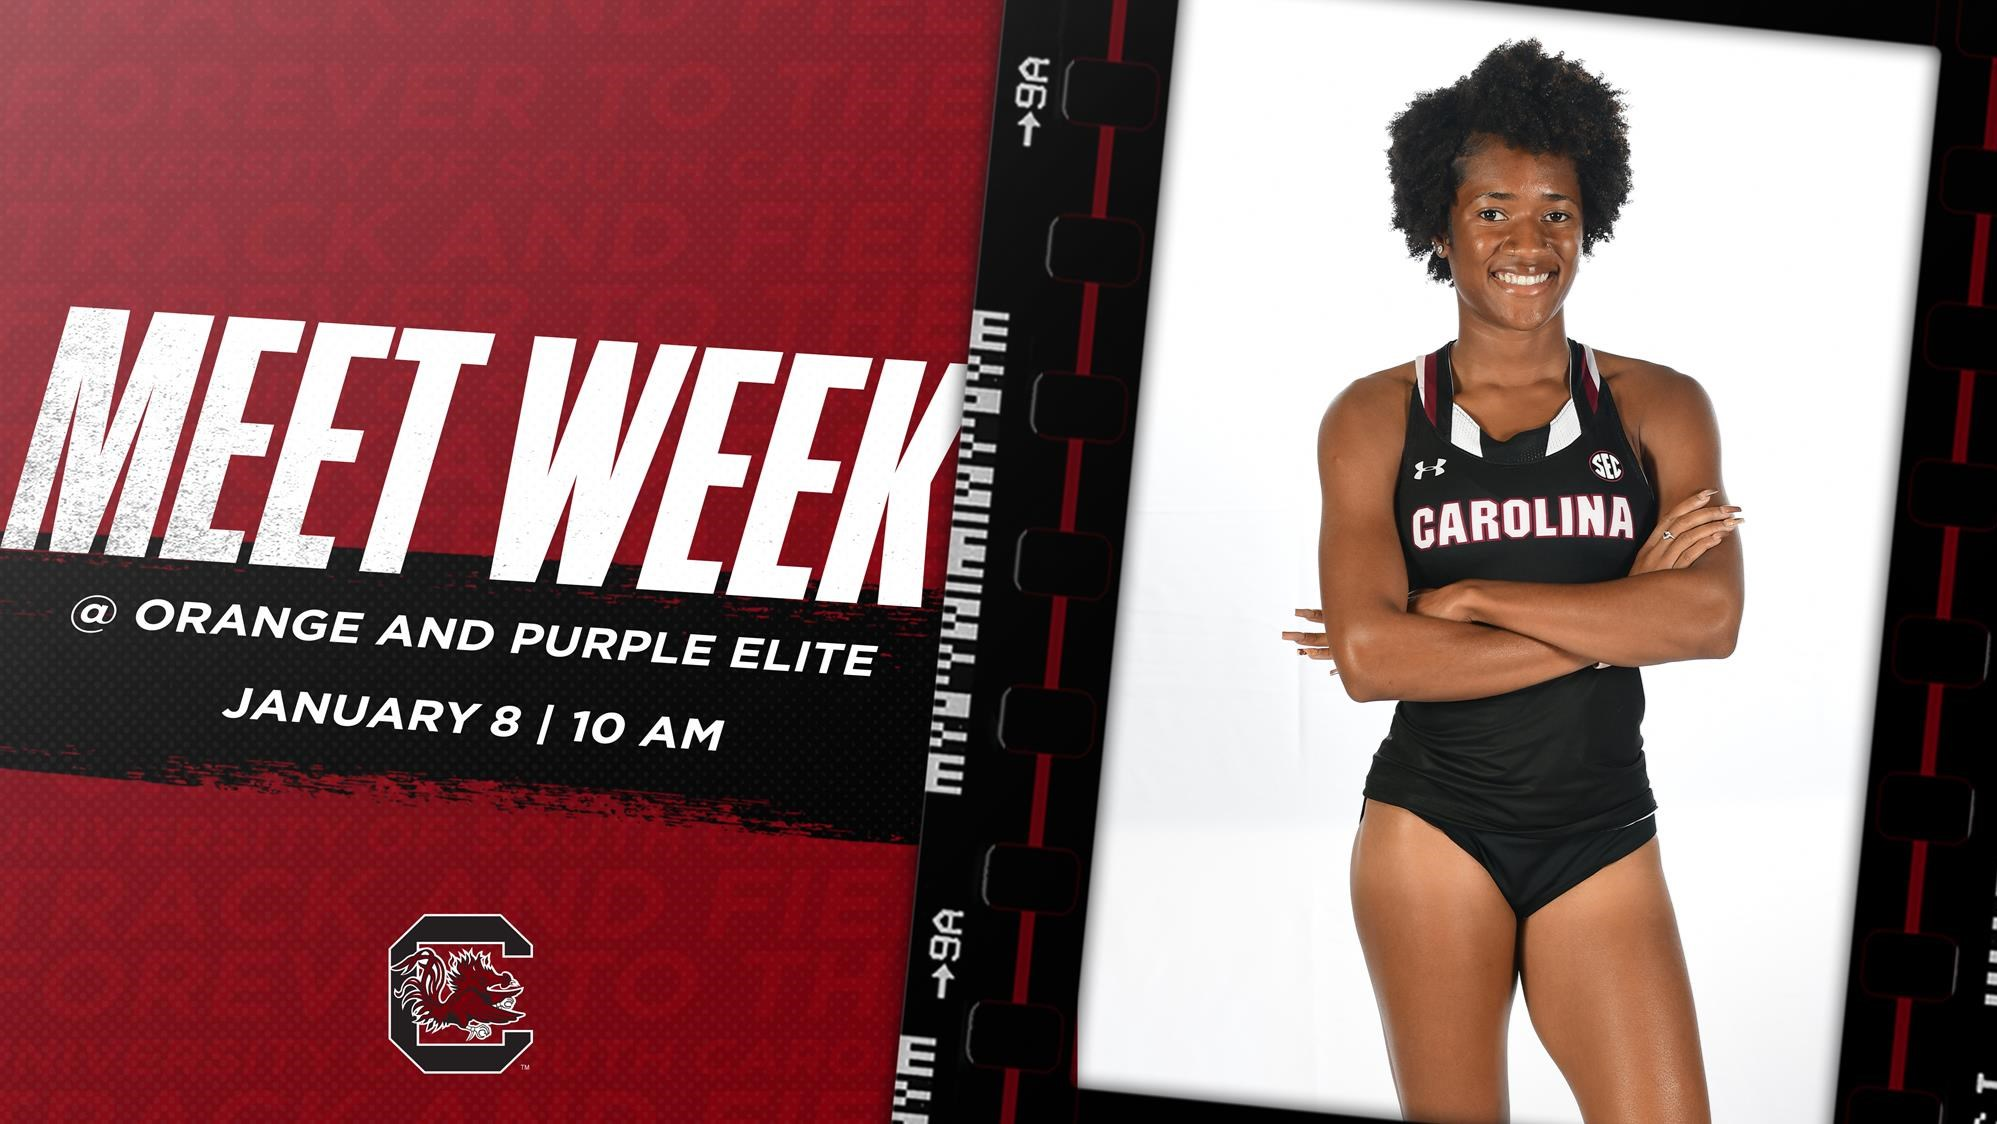 Gamecock Track and Field Opens Calendar Year at Clemson